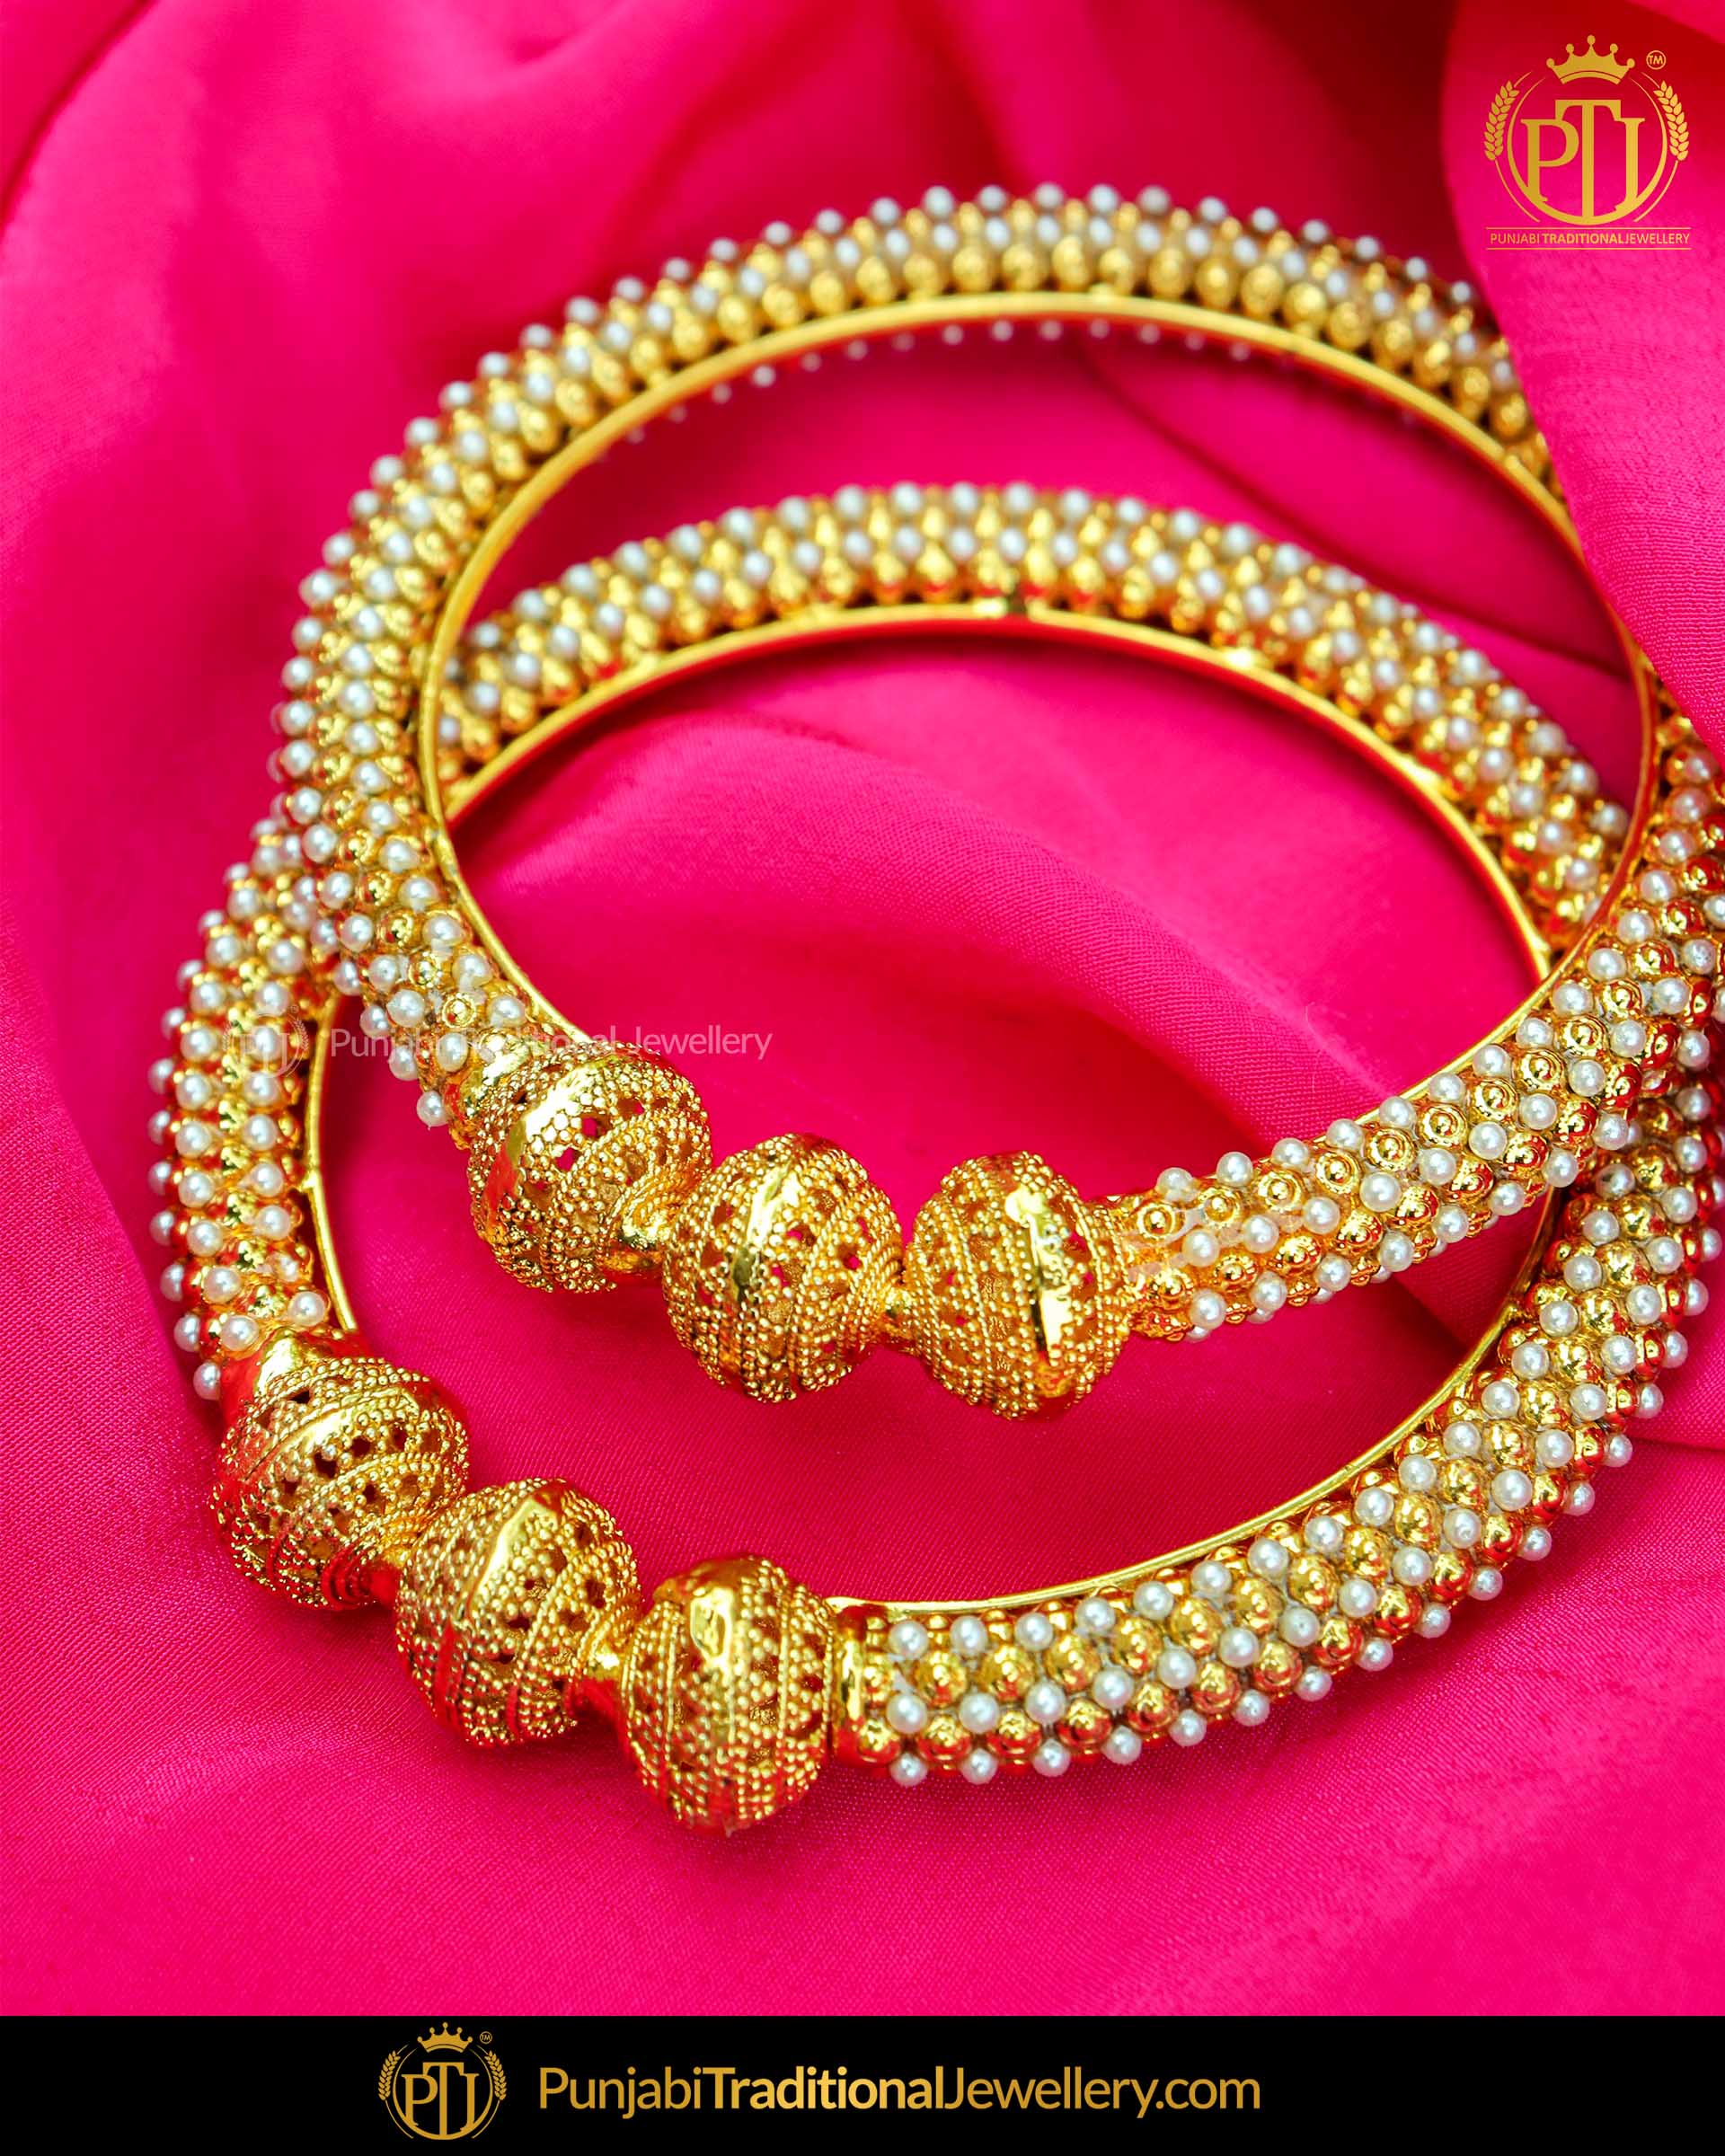 Antique Gold Finished Pearl Johda bangles Openable Bangles (Pair) | Punjabi Traditional Jewellery Exclusive